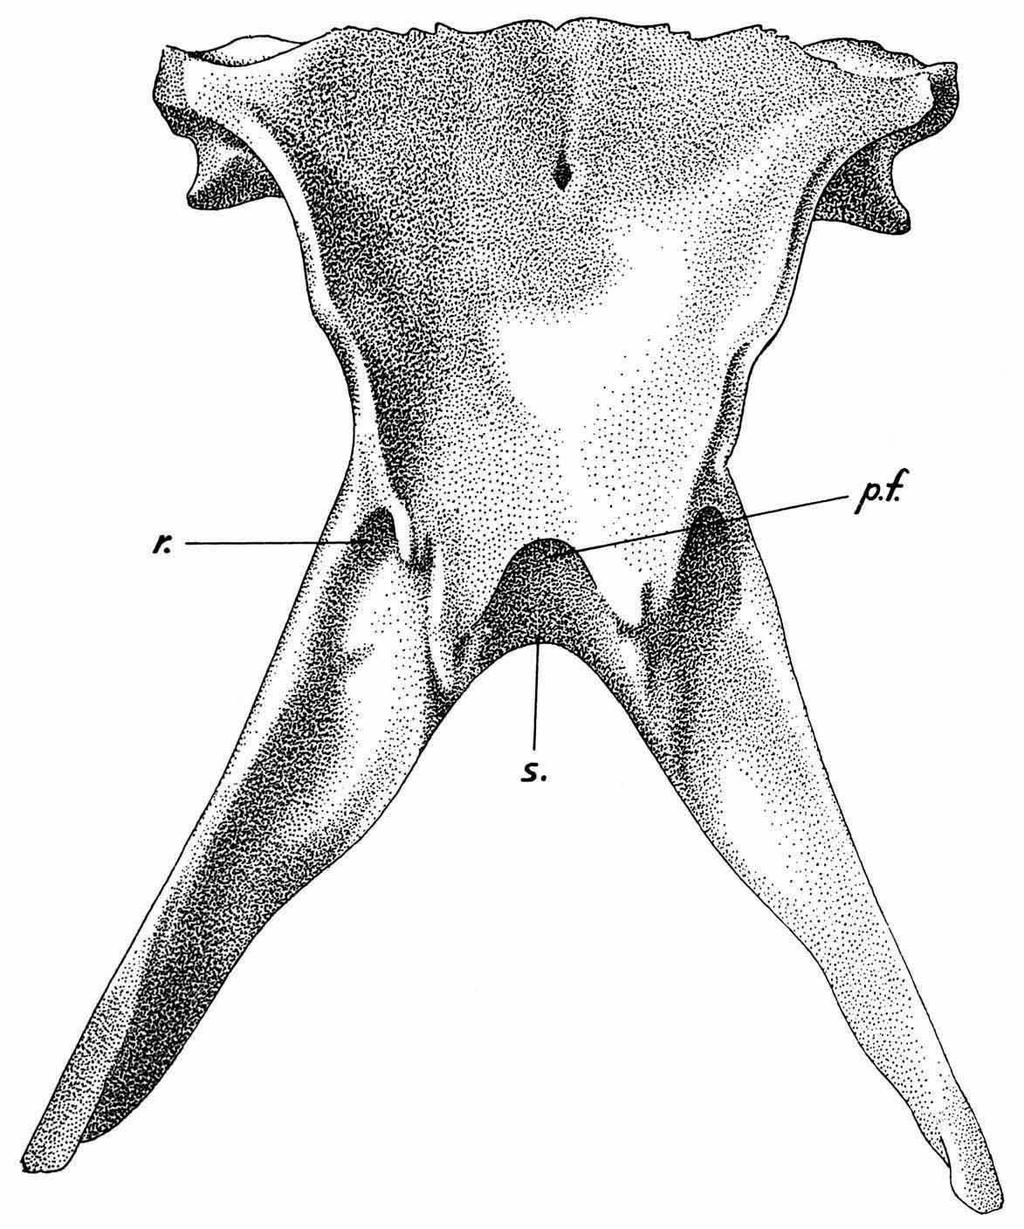 116 L. D. BRONGERSMA the tip; at the base of the processes the posterior border forms a distinct angle with the latero-posterior border of the parietal table. In V.